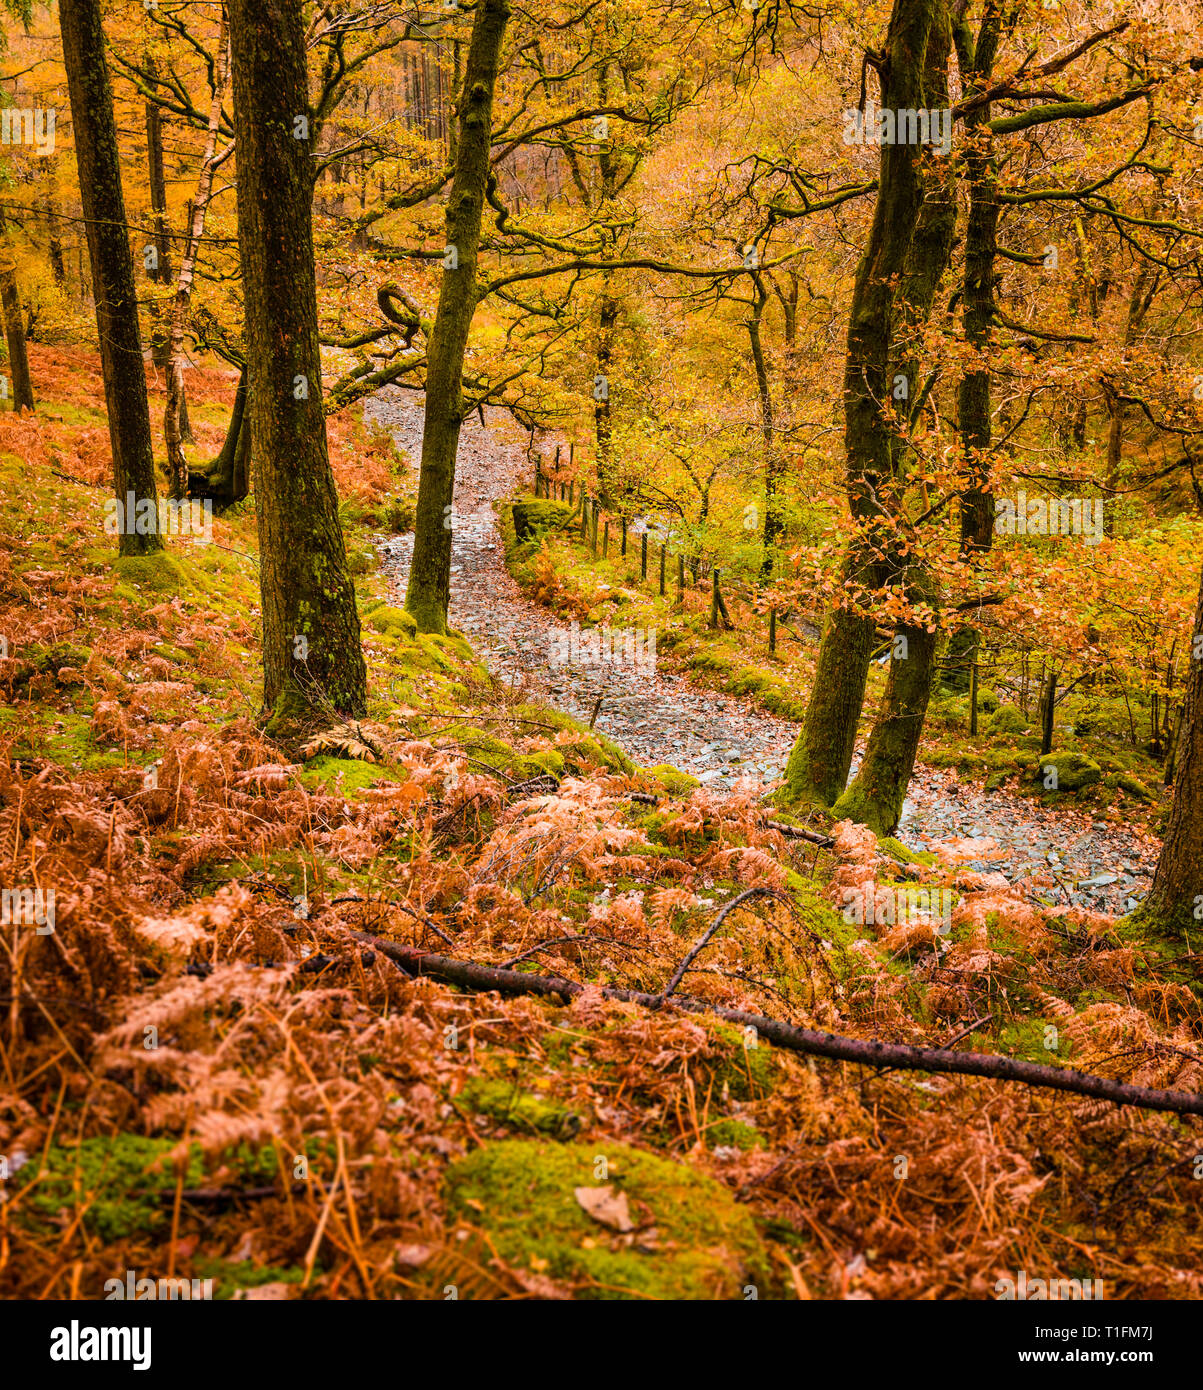 From Castle Crag in Borrowdale walking between the mountains on the path towards Dalt Wood taking in the Autumnal colours from the trees & ferns. Stock Photo